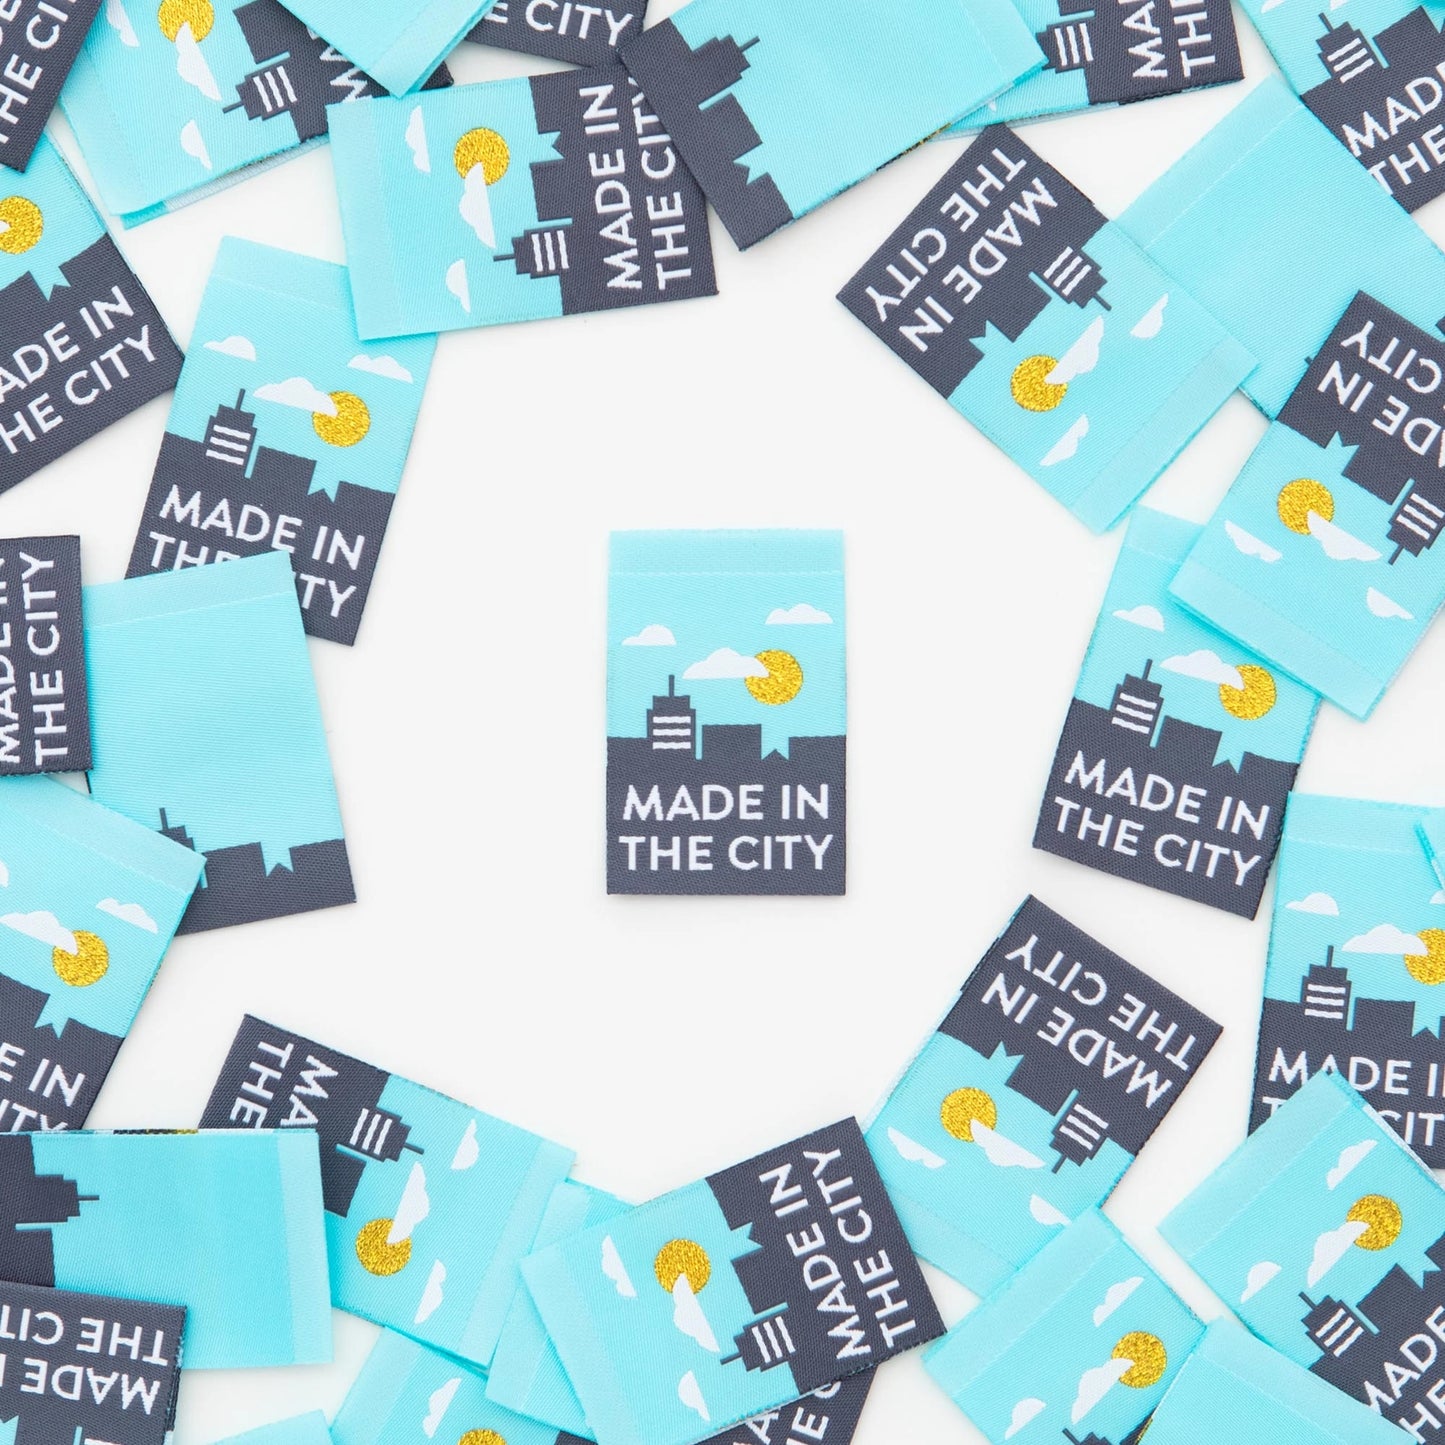 Made in the City ✿ Quilt Labels